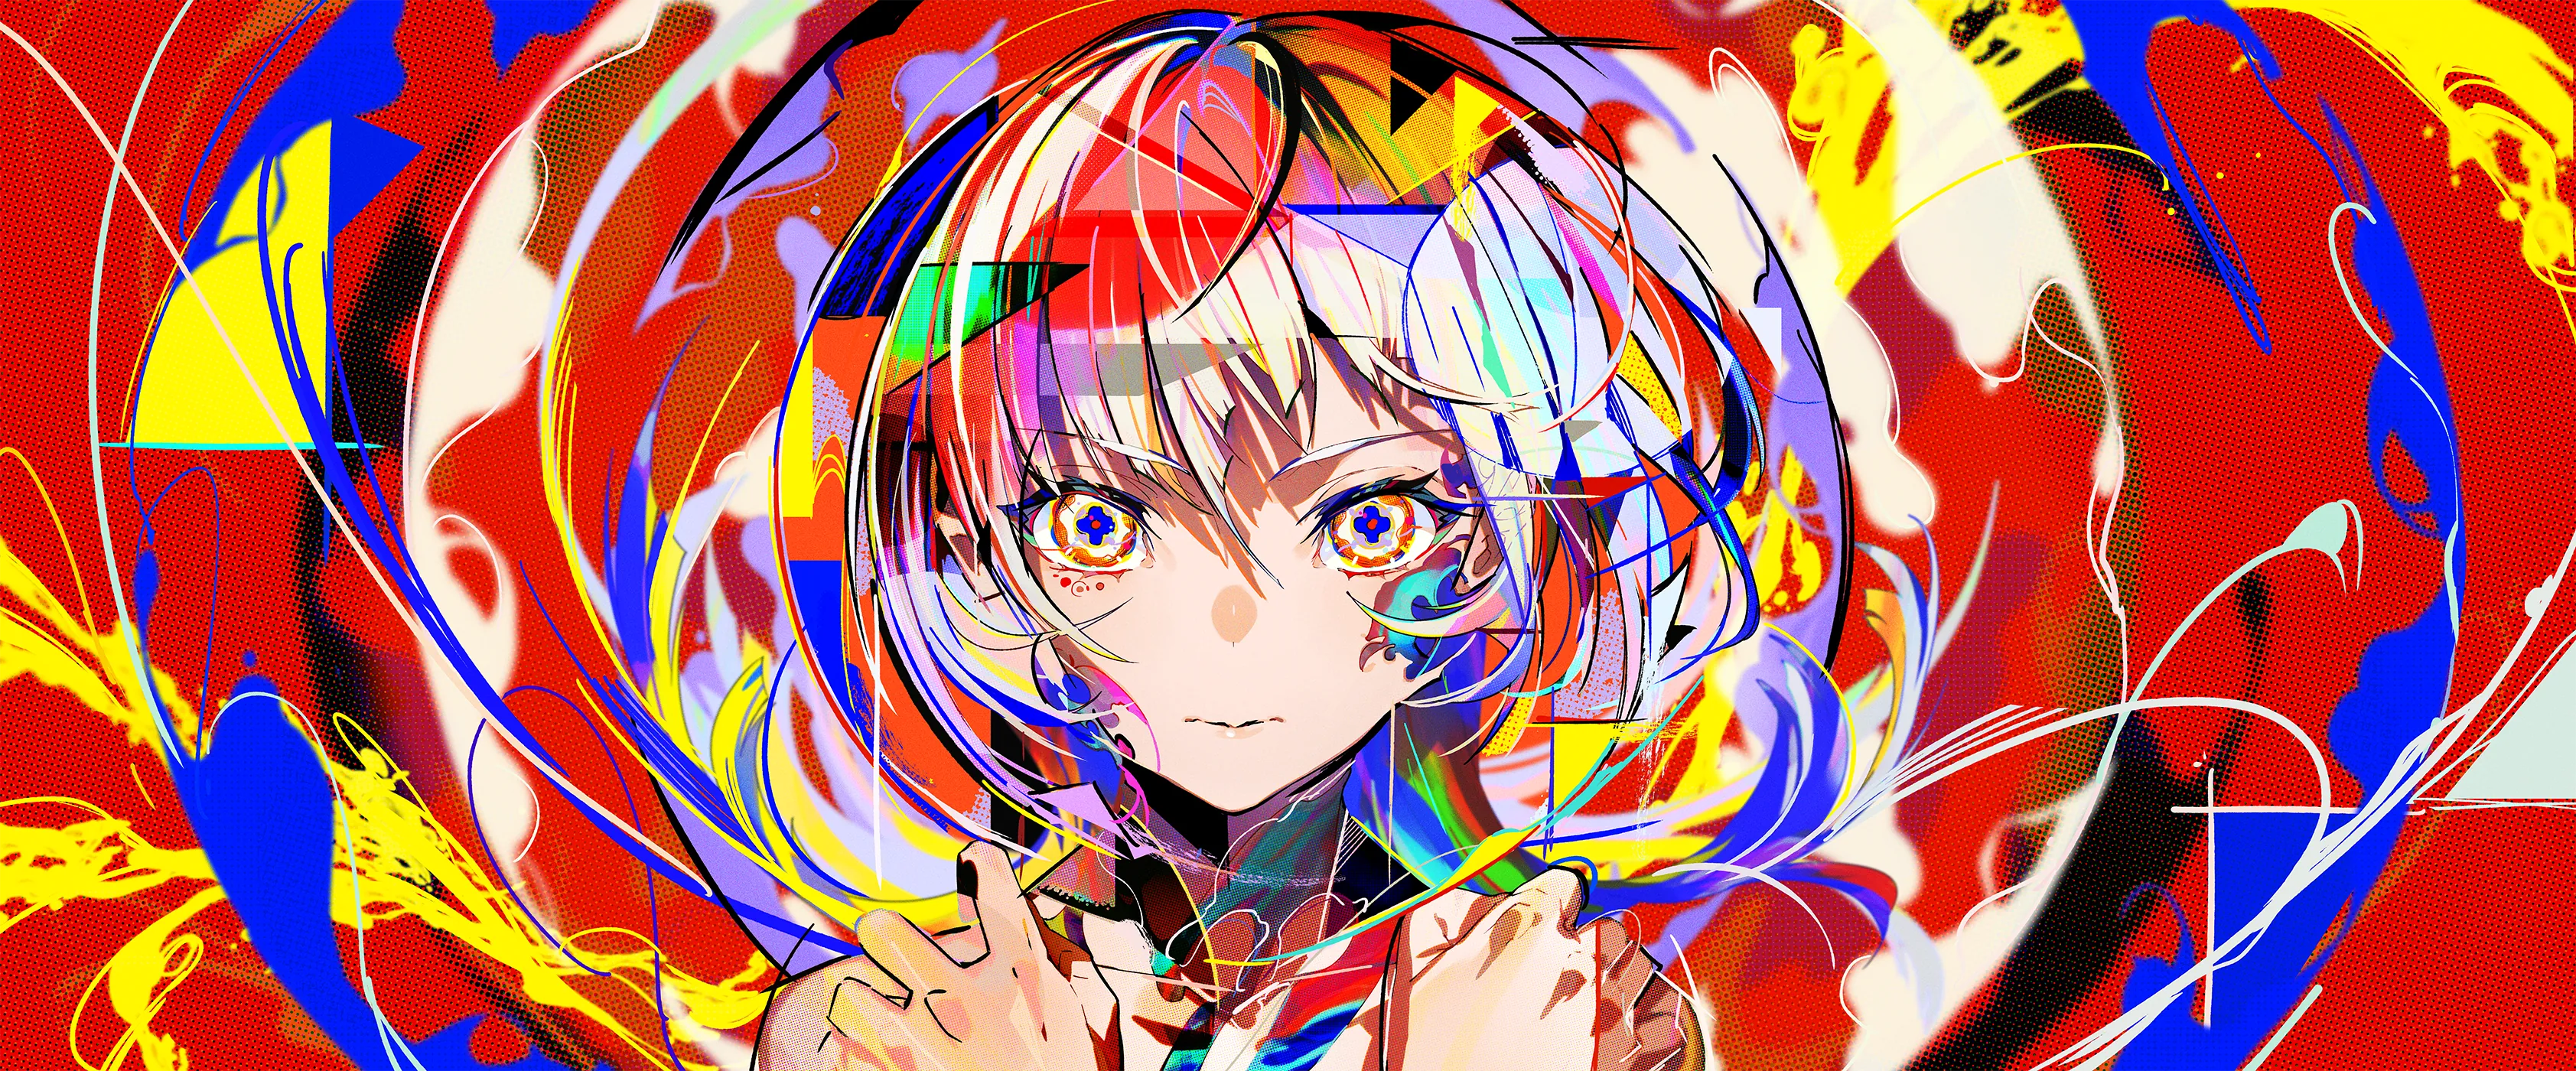 Anime 3367x1400 artwork illustration women anime girls colorful abstract looking at viewer mika pikazo